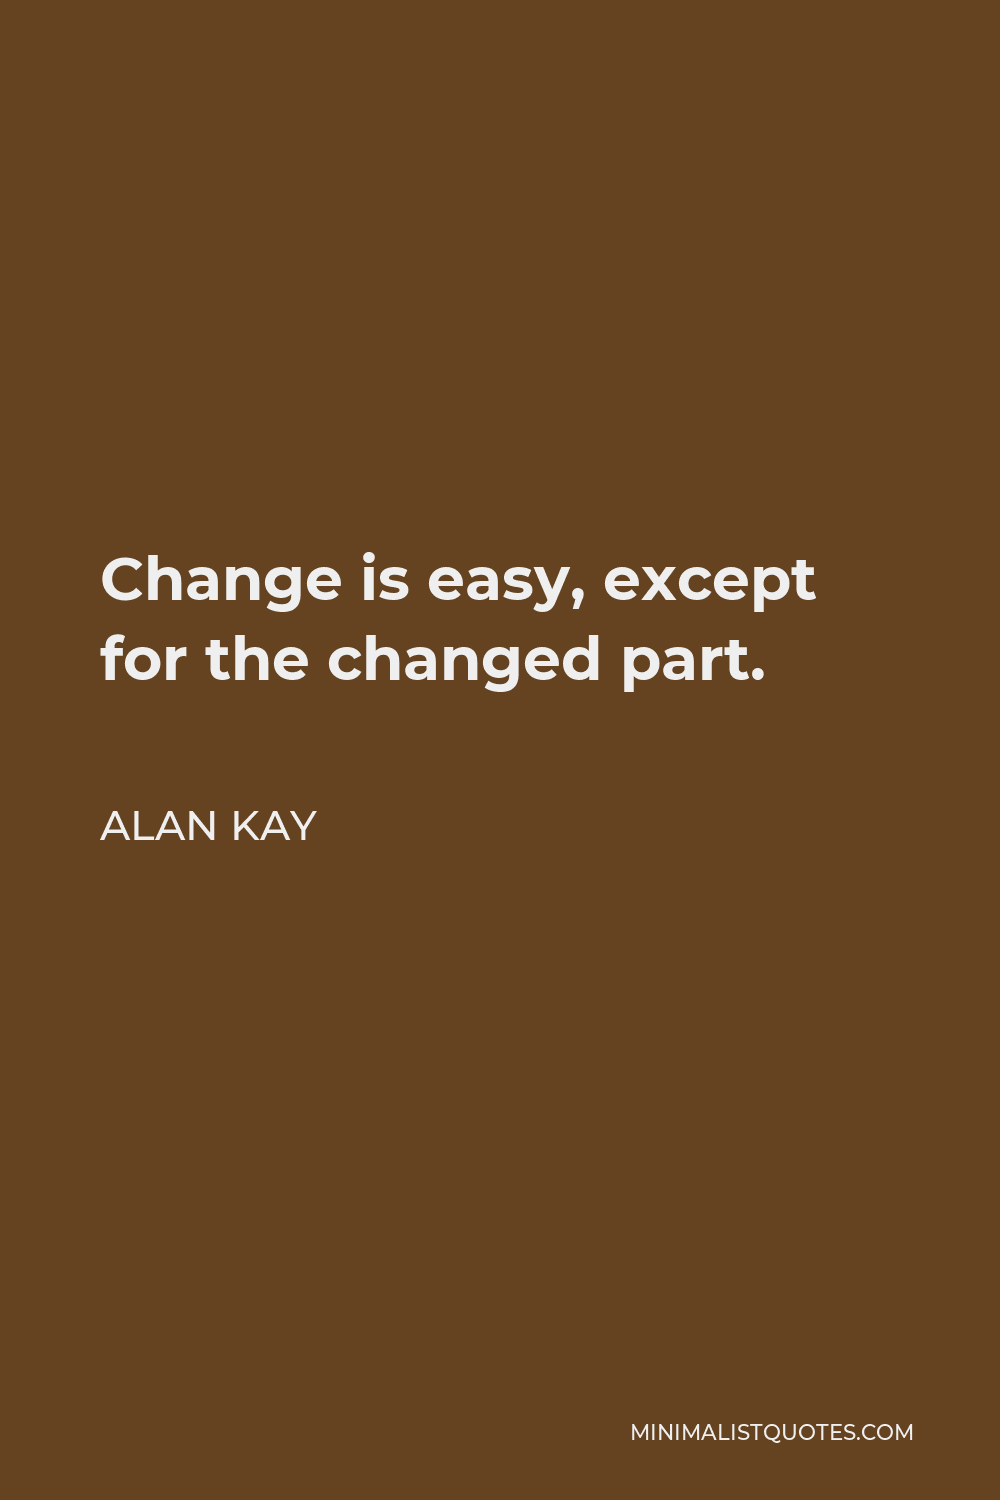 Alan Kay Quote - Change is easy, except for the changed part.